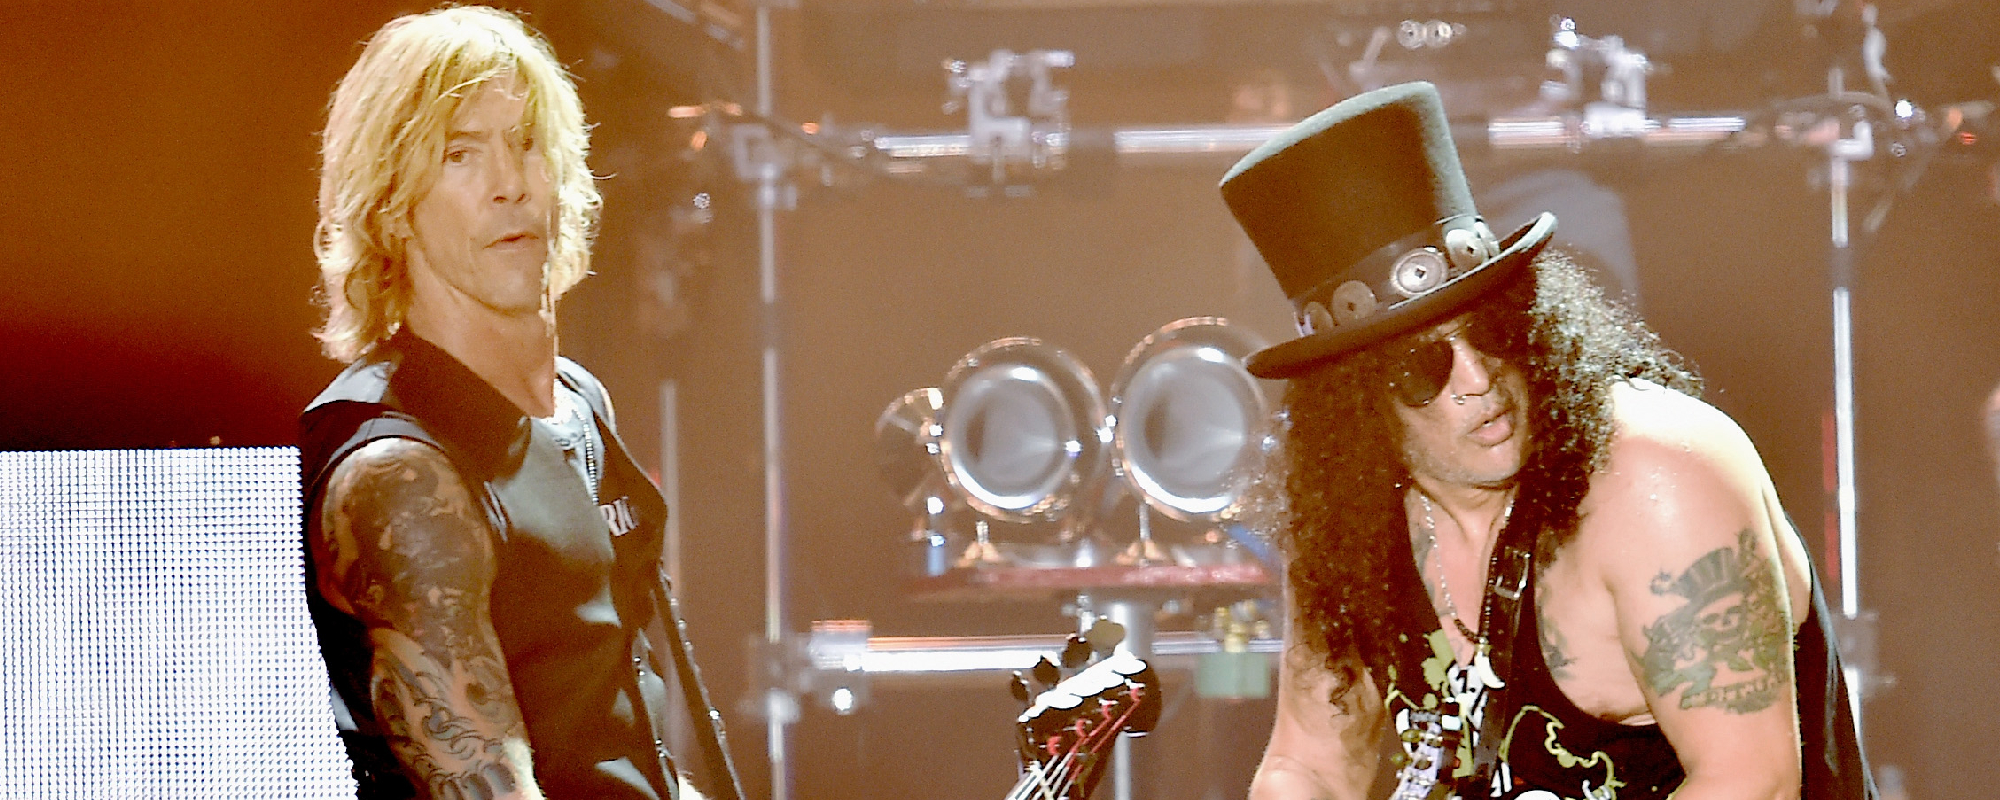 Watch Guns N' Roses Go AI in Wild New Music Video for ”The General”